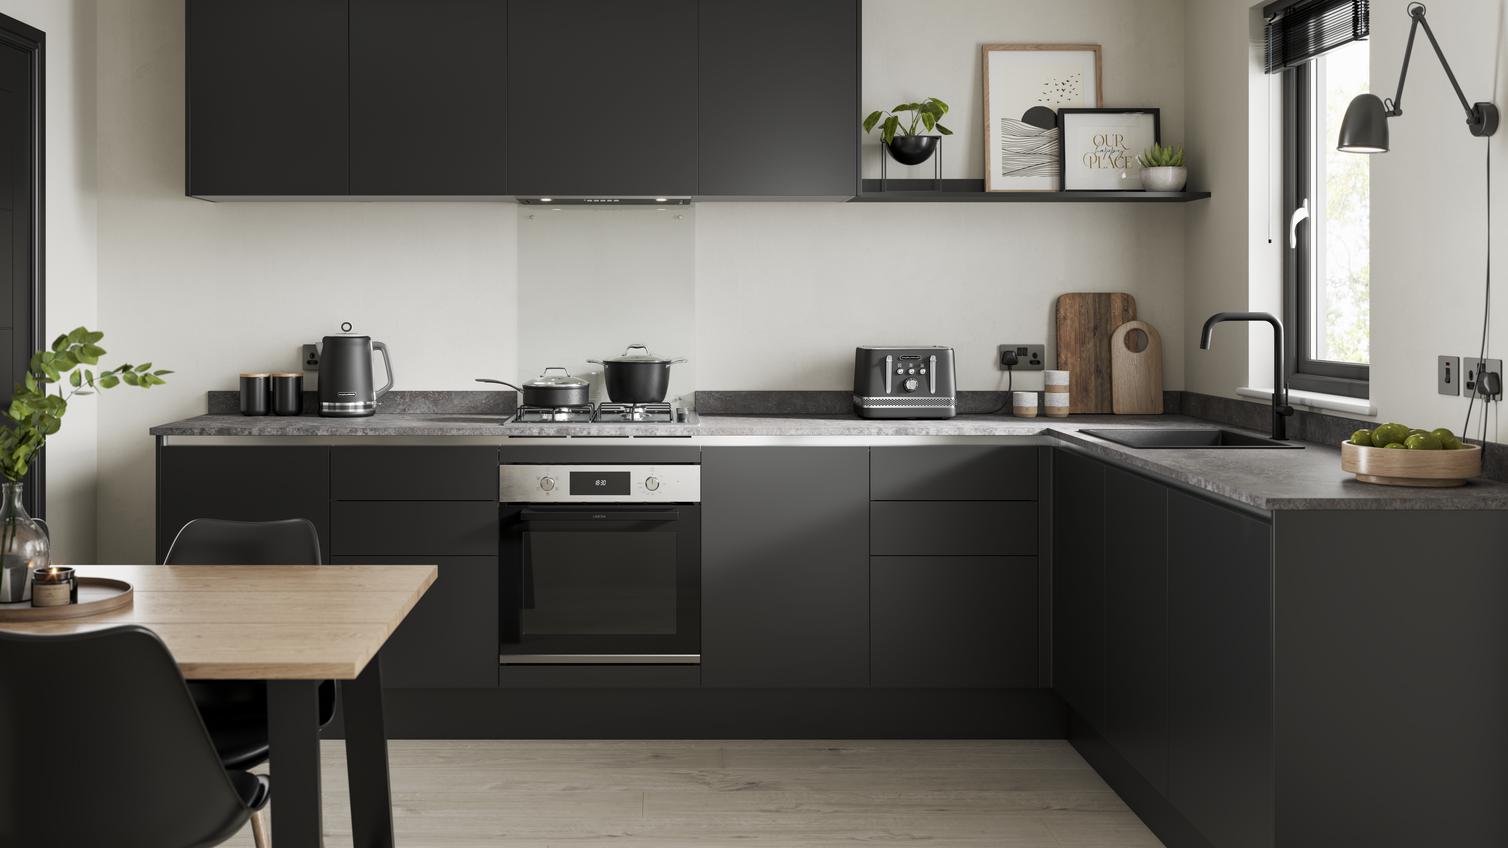 Sleek, modern black kitchen with handleless cabinetry, wall-mounted cupboards, and a grey worktop in an l-shape layout.